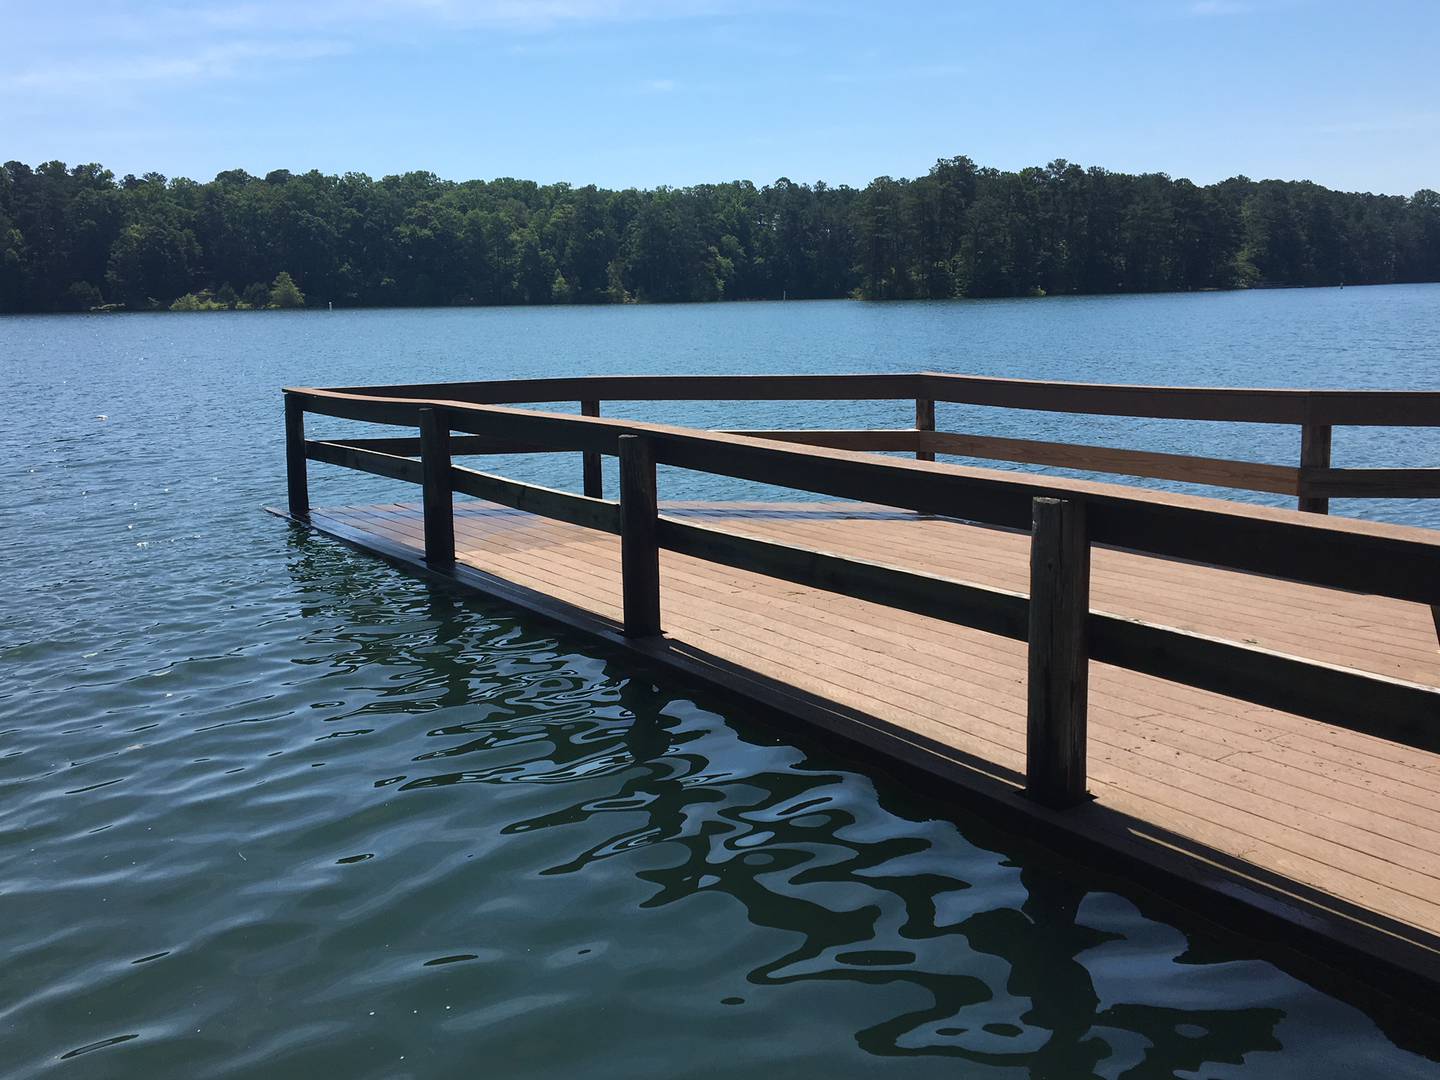 High Levels at Lake Lanier force closures of many beaches, boat ramps